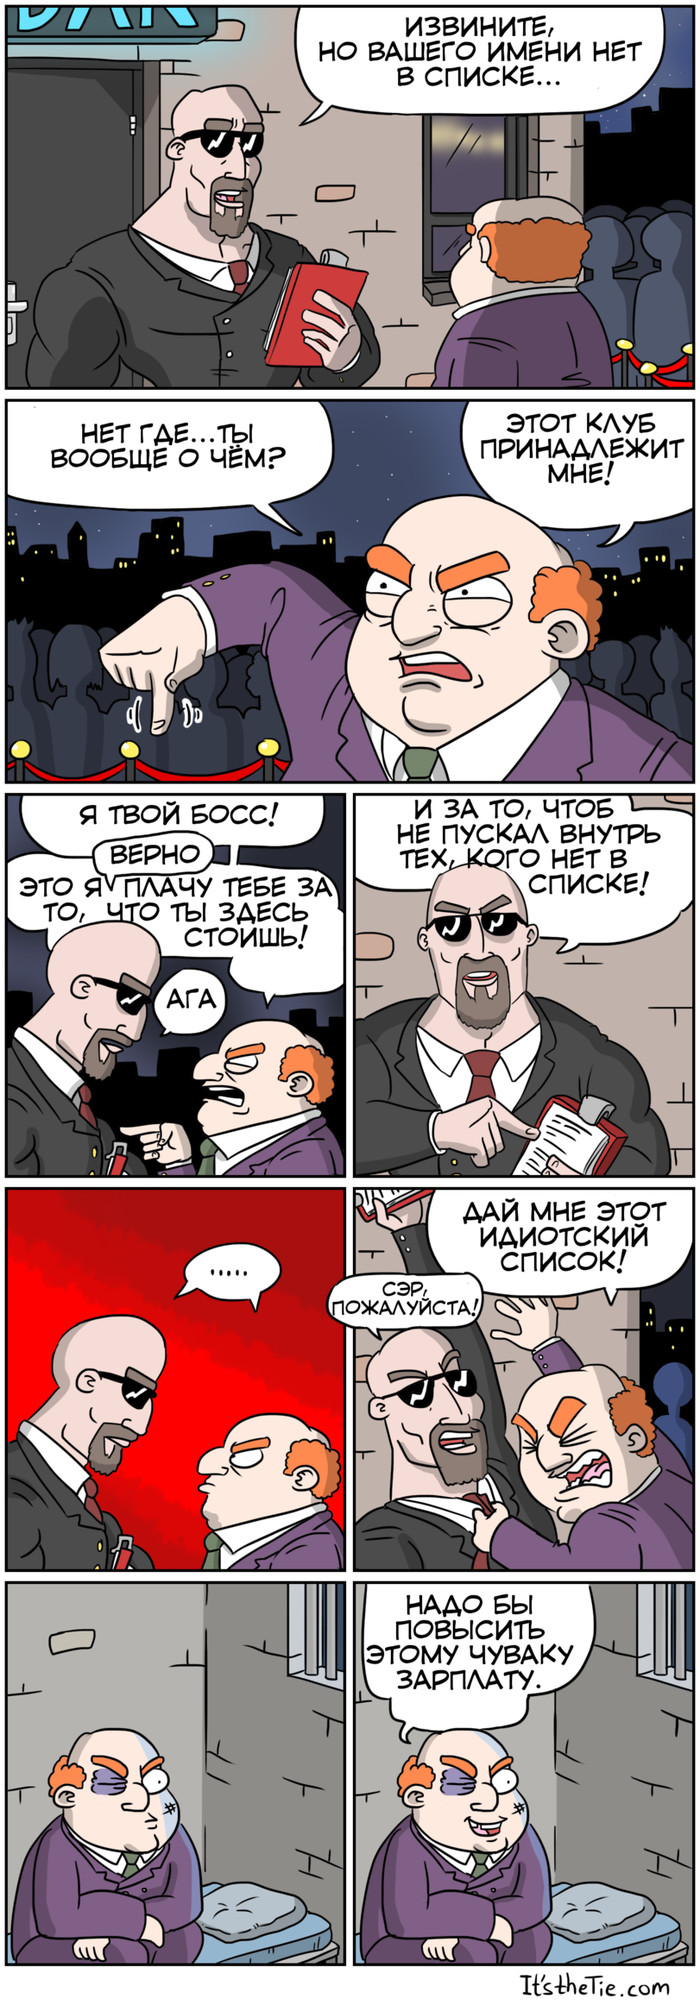 A good boss, a responsible employee, it would always be like that - , Comics, Itsthetie, Longpost